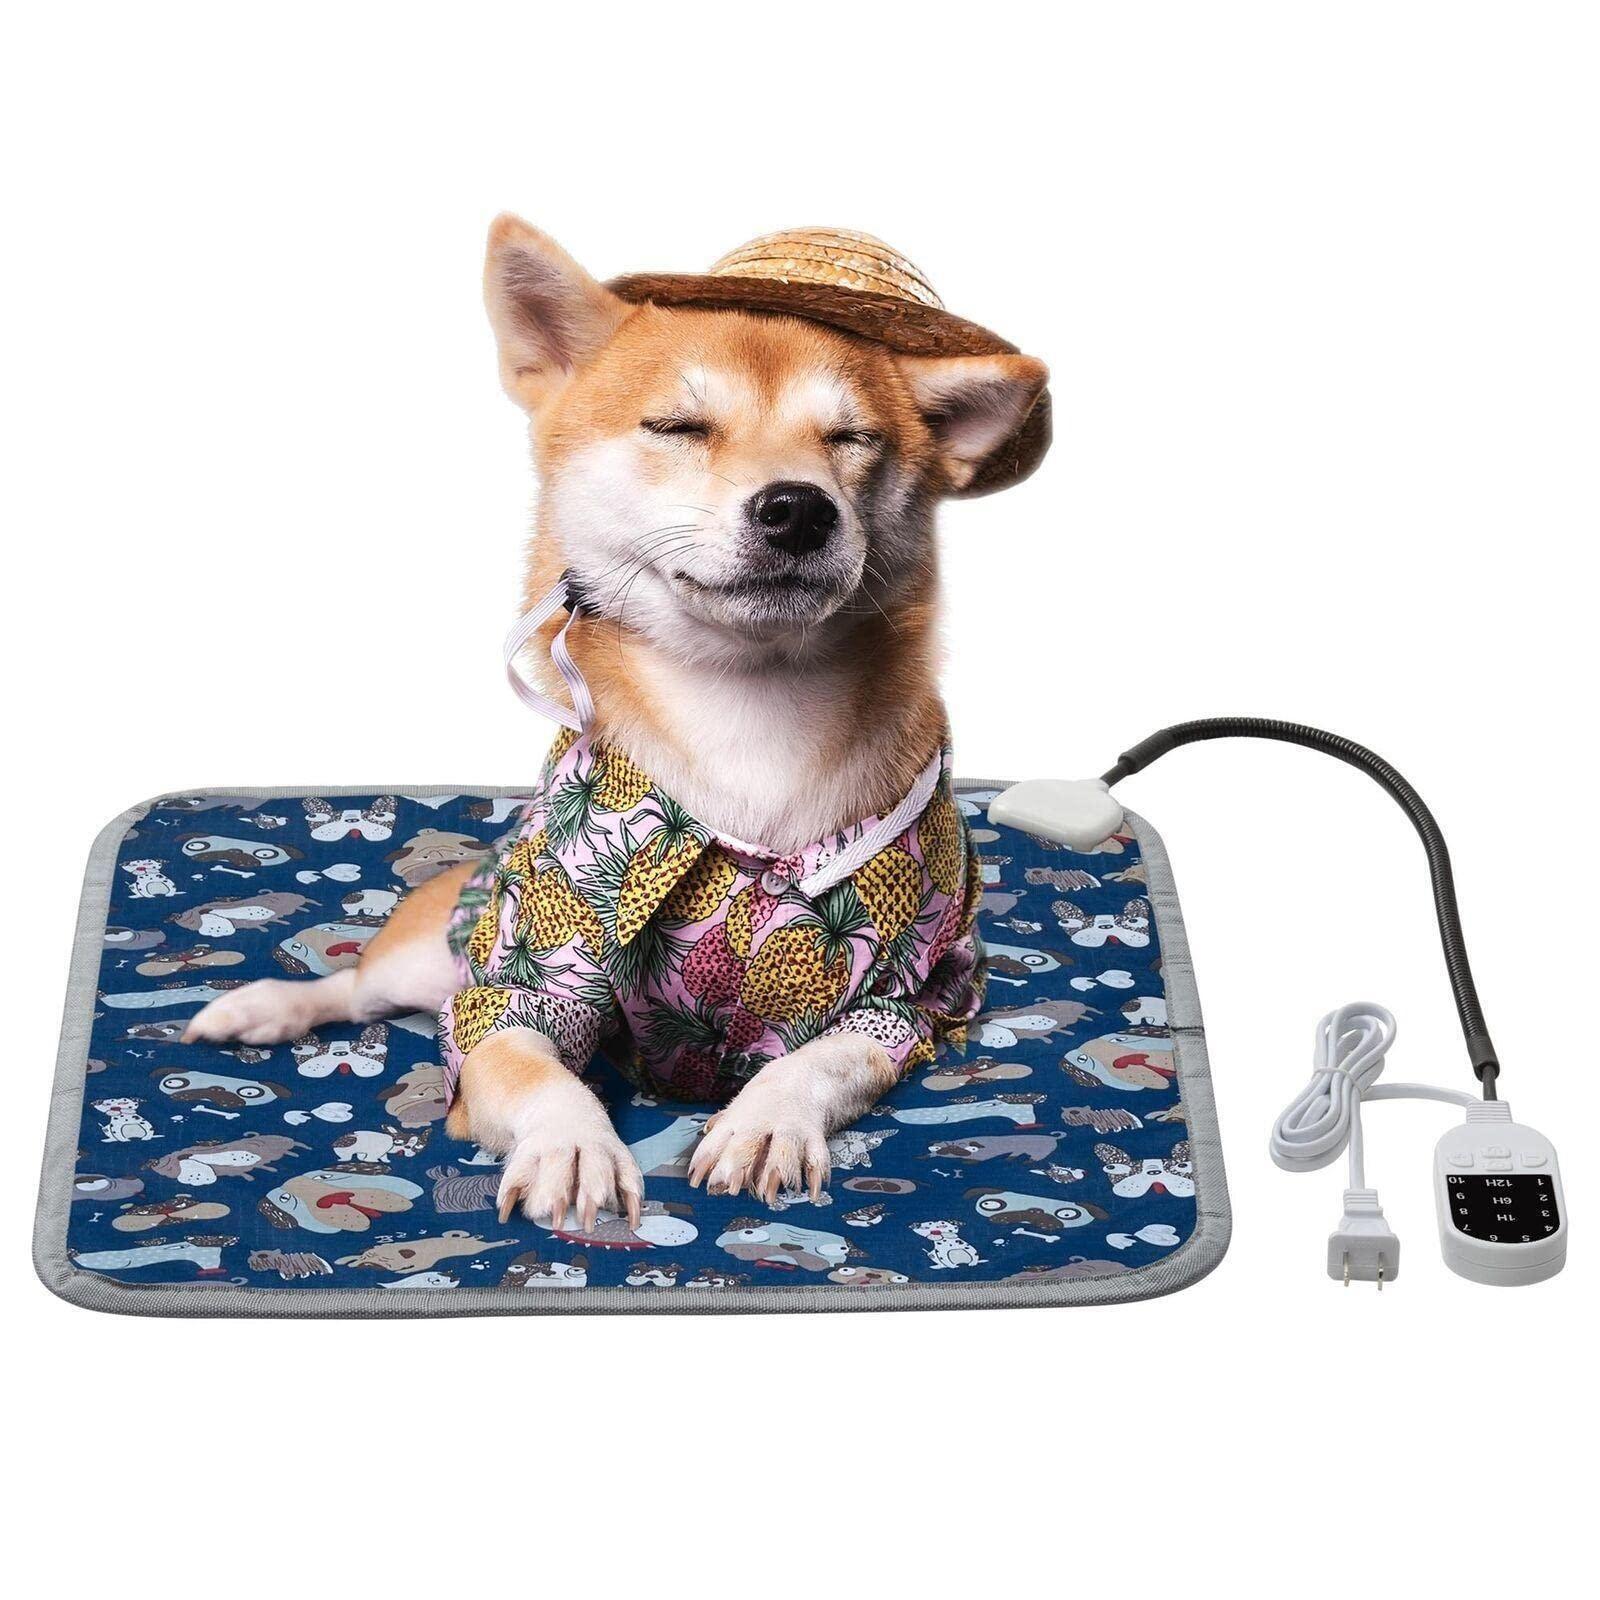 Pet Heating Pad Dog Electric Waterproof Mat Warming Bed Indoor Heated Bed-Small (Small)